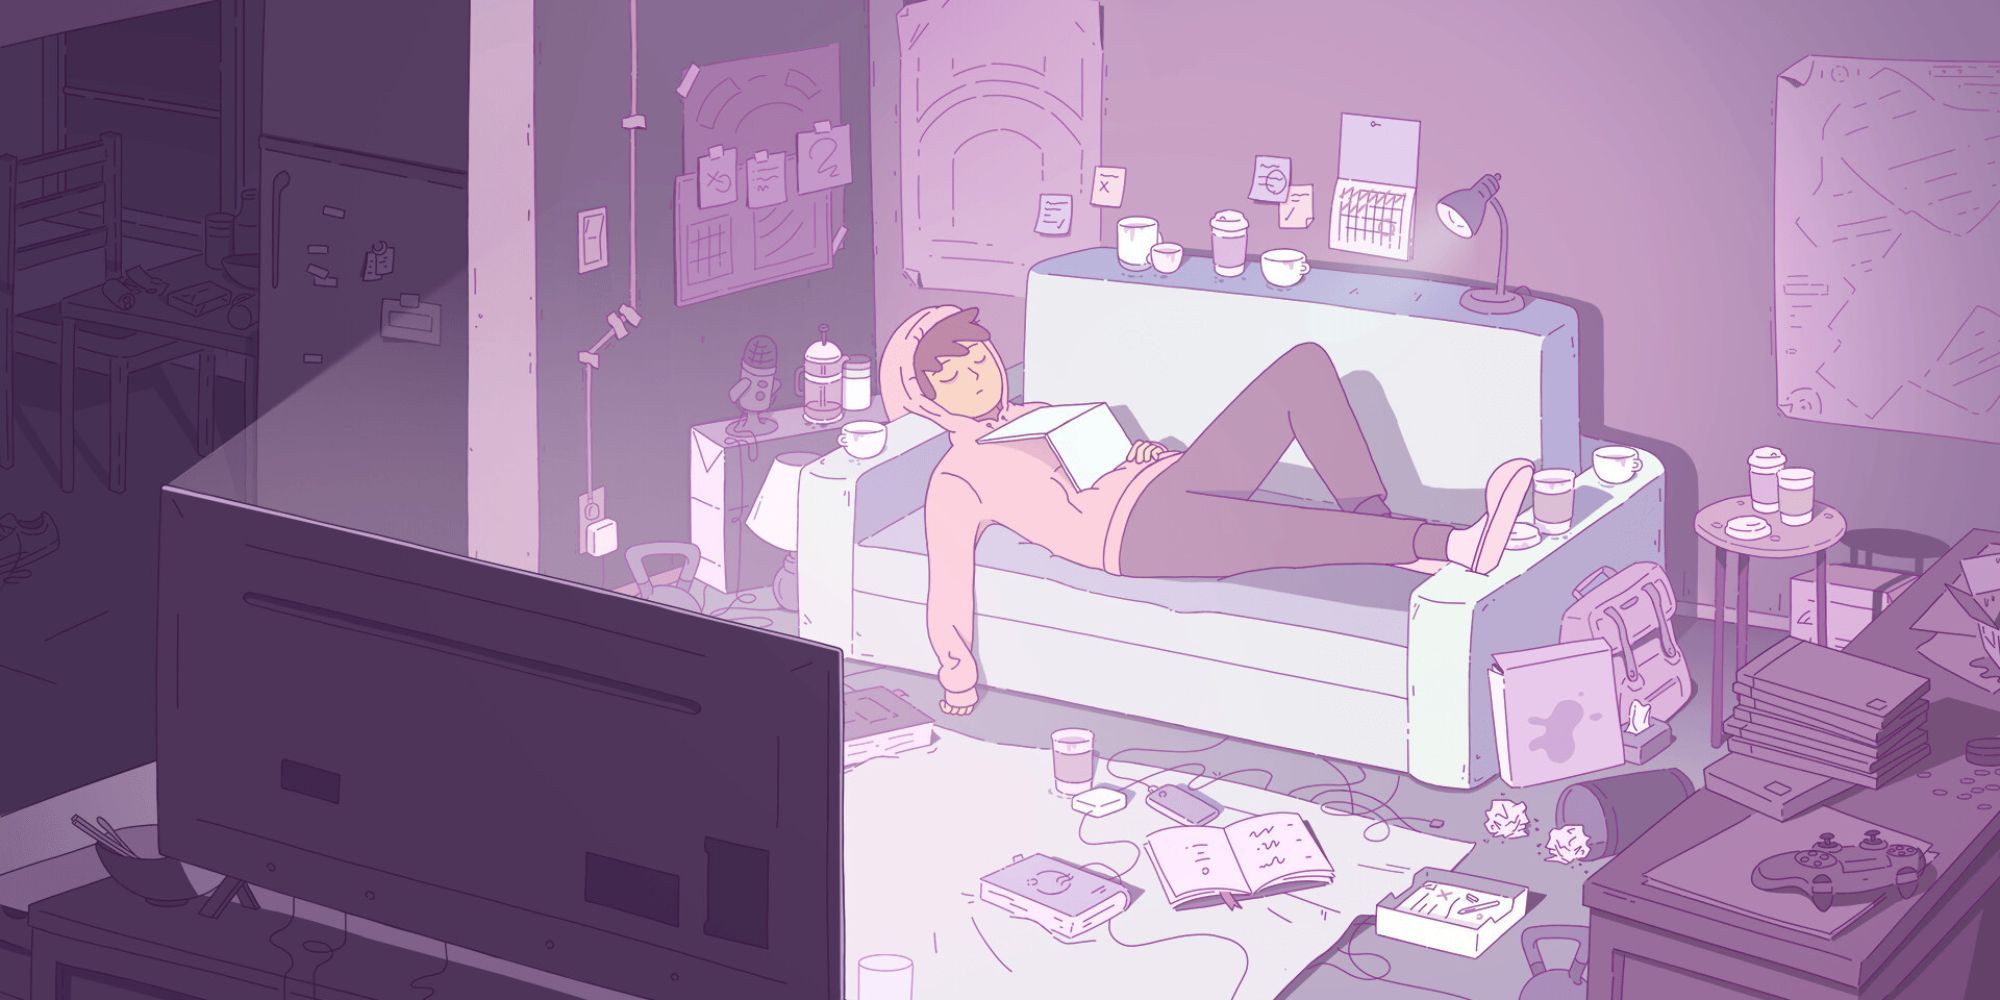 A man in a pink sweater lays on a couch surrounded by junk